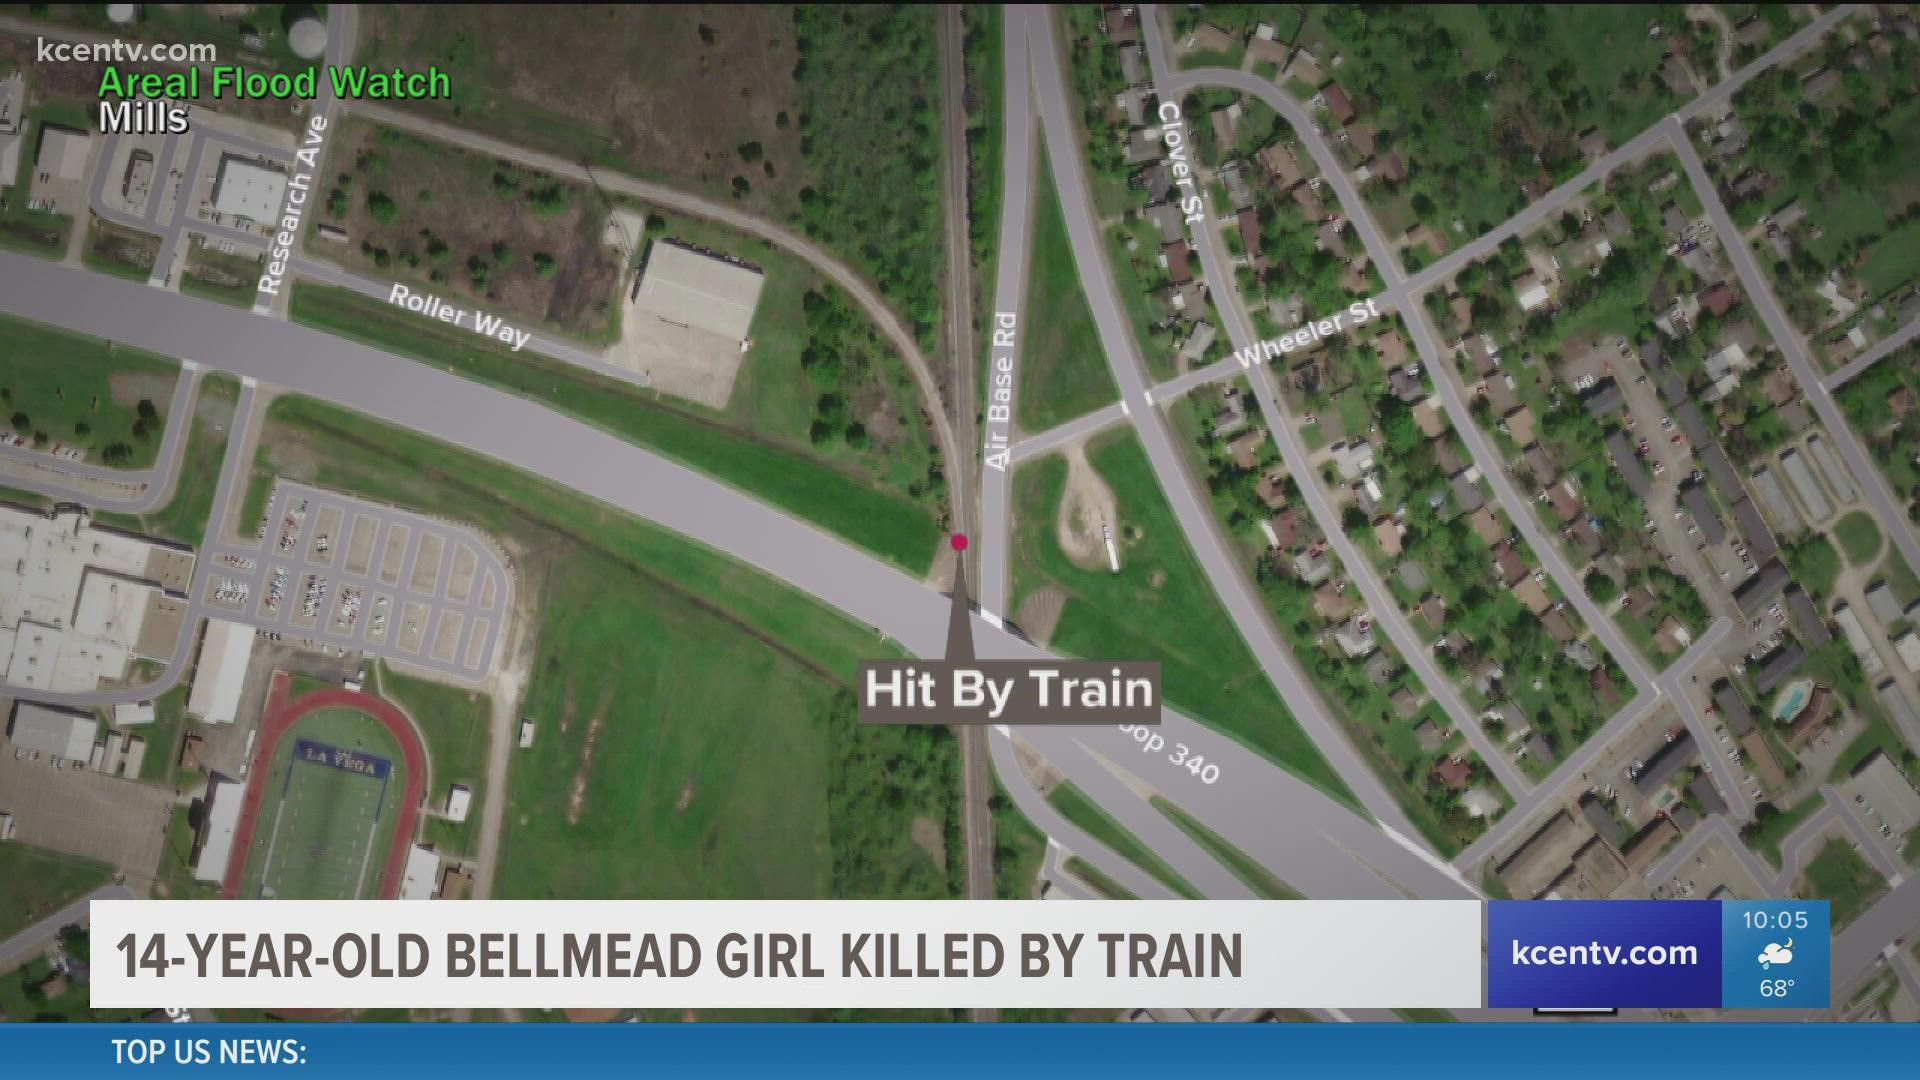 The girl is not being identified at this time, but police say she was a Bellmead resident and JROTC student.